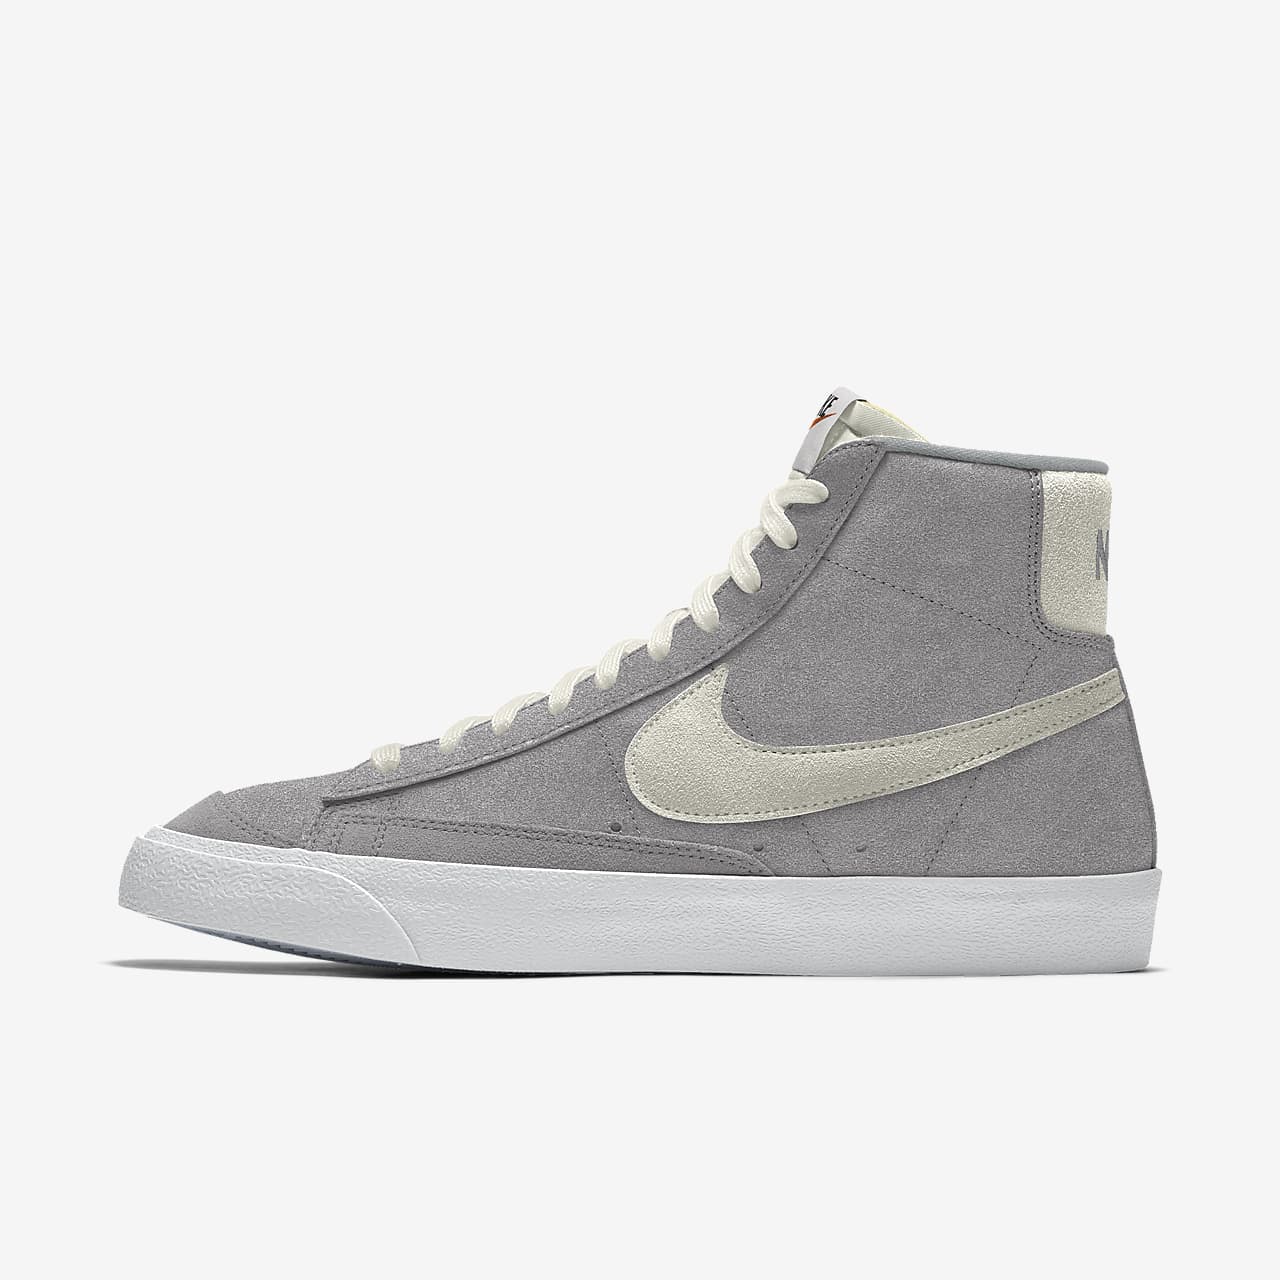 Chaussure personnalisable Nike Blazer Mid '77 By You pour Femme